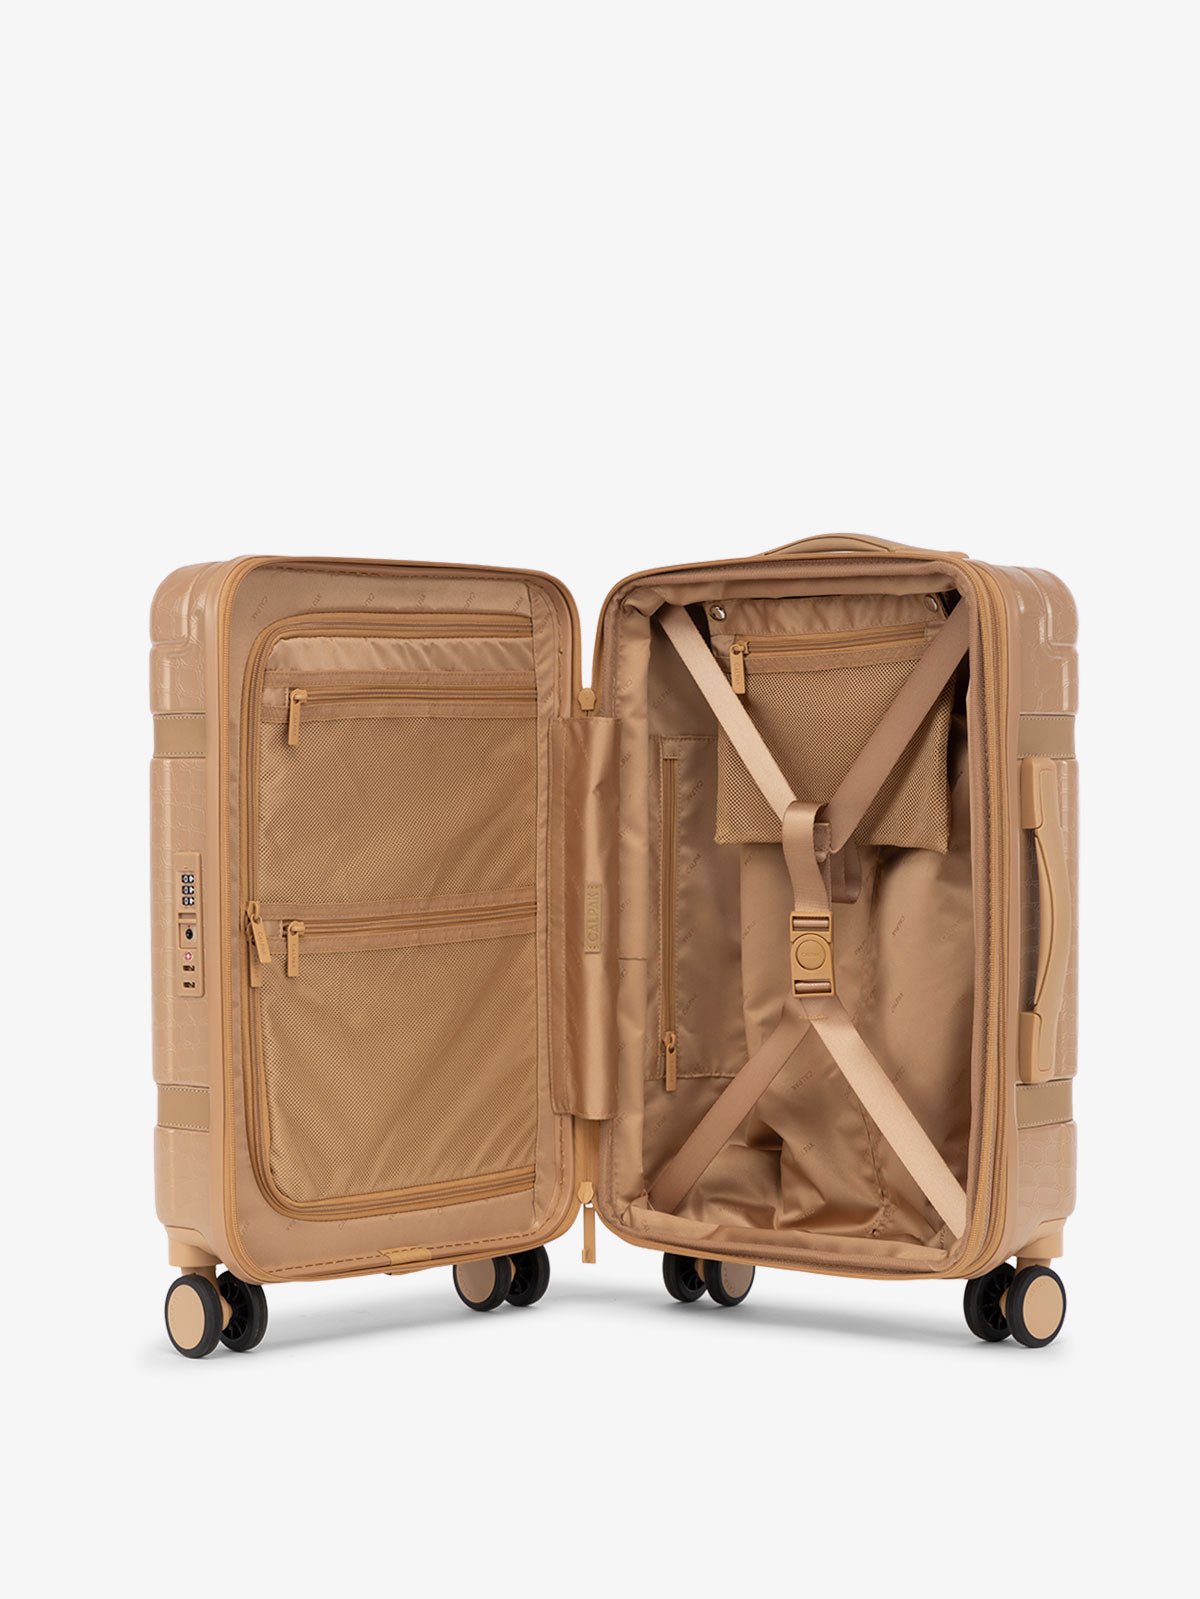 Trnk carry-on luggage with compression straps